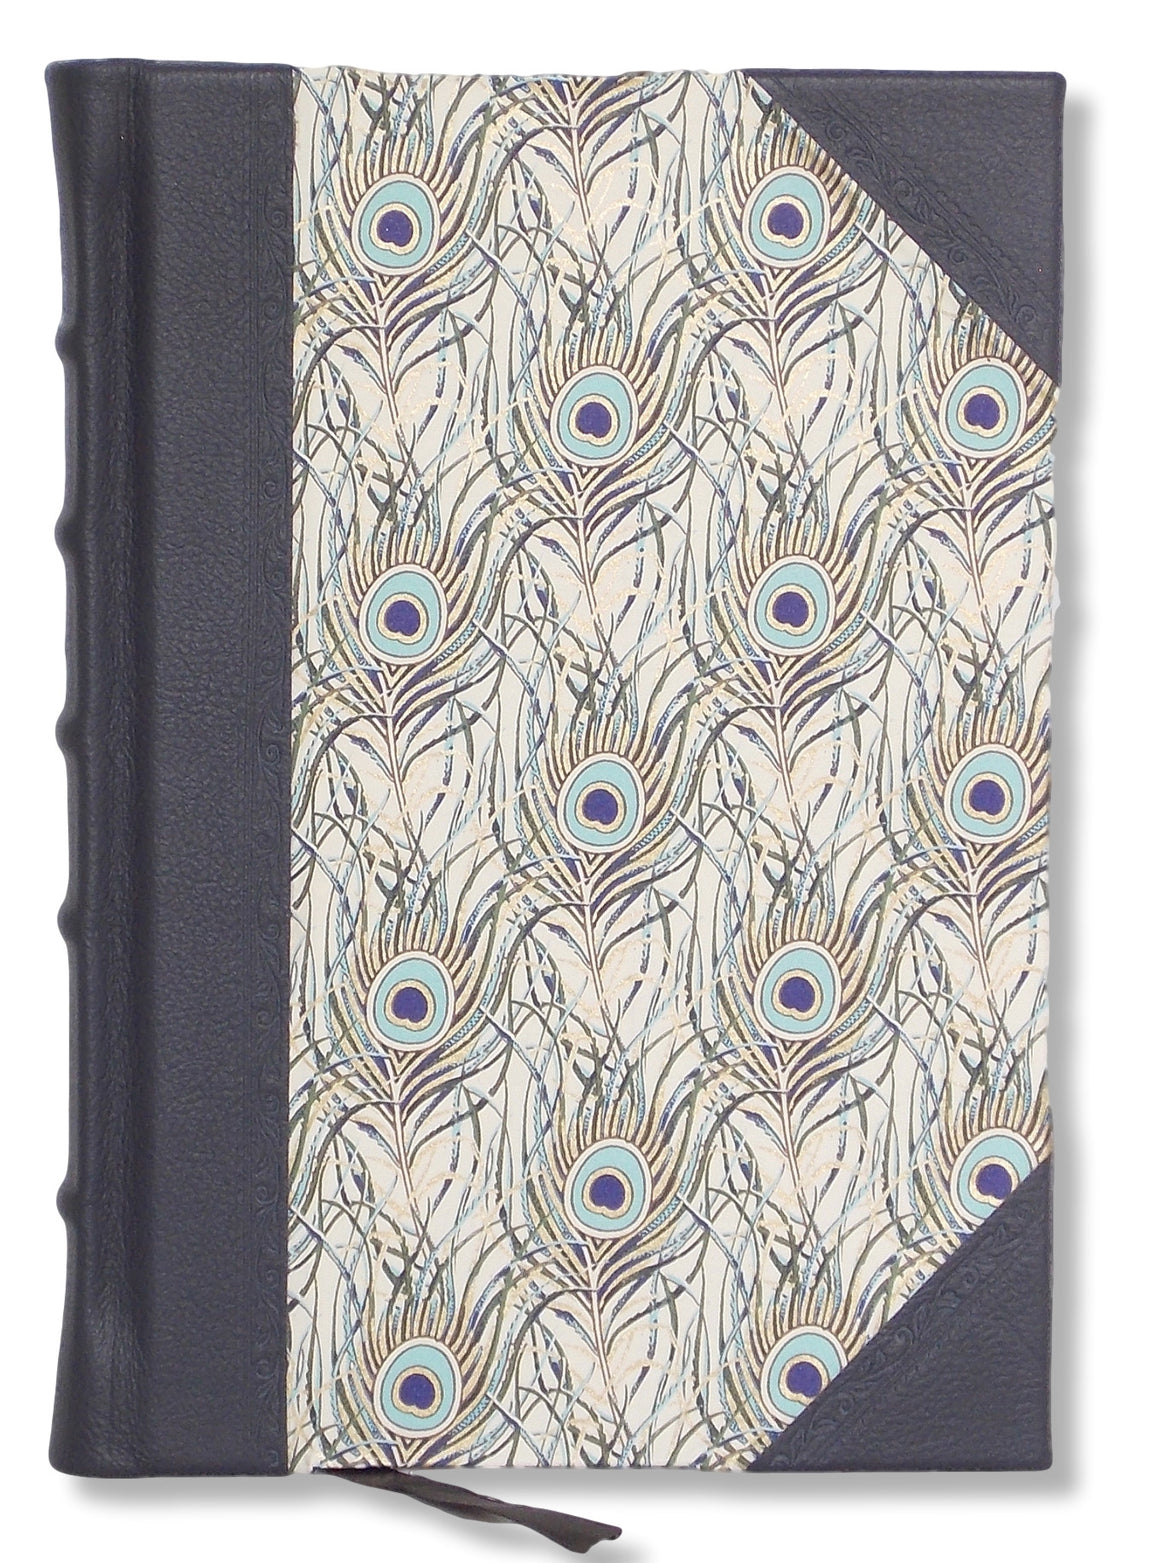 Half leather journal with gold embossed peacock design sides